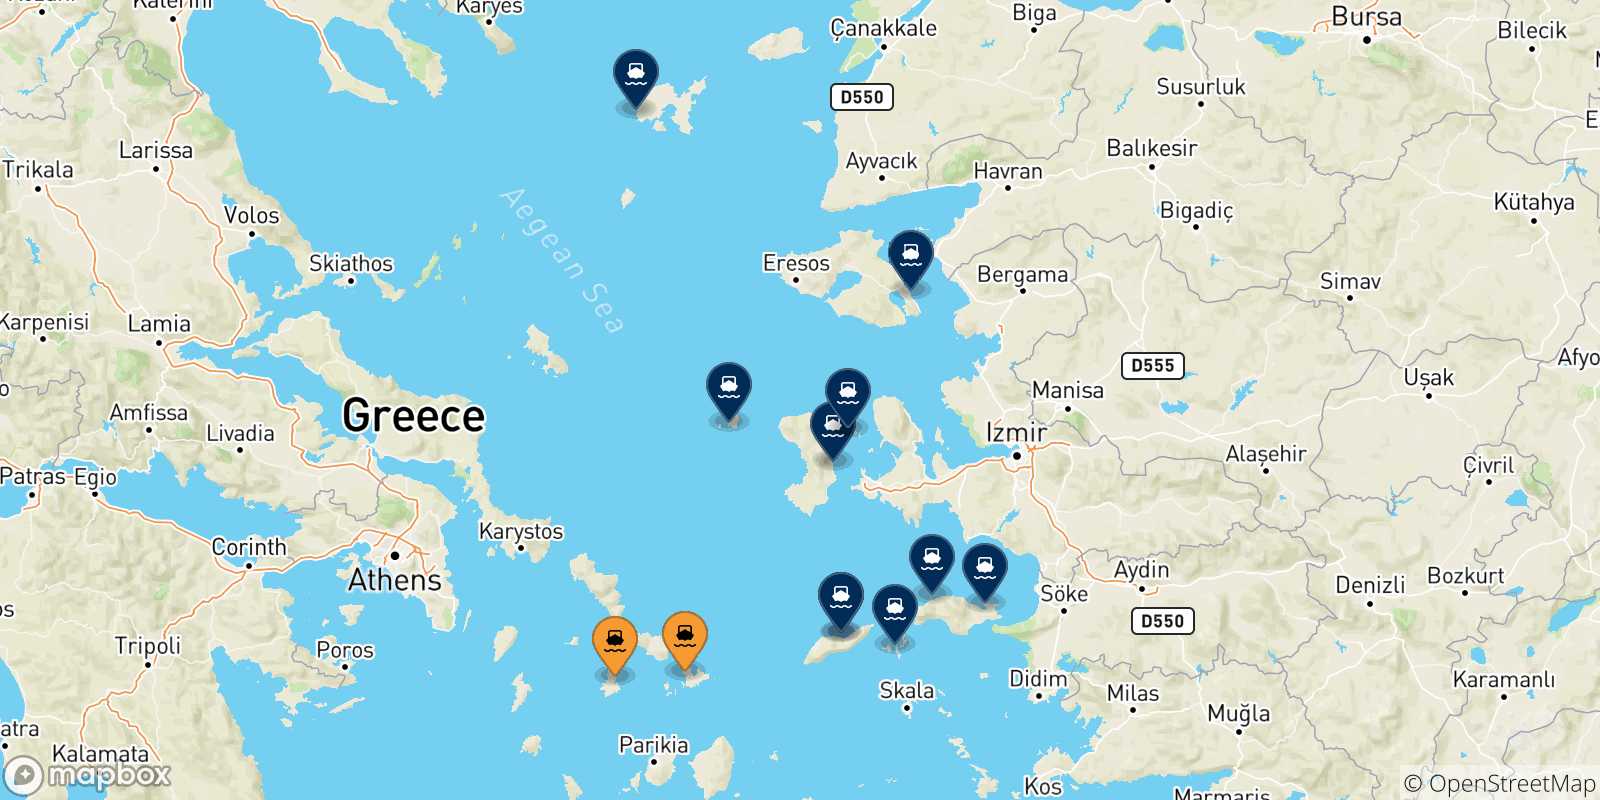 Map of the possible routes between Cyclades Islands and Aegean Islands